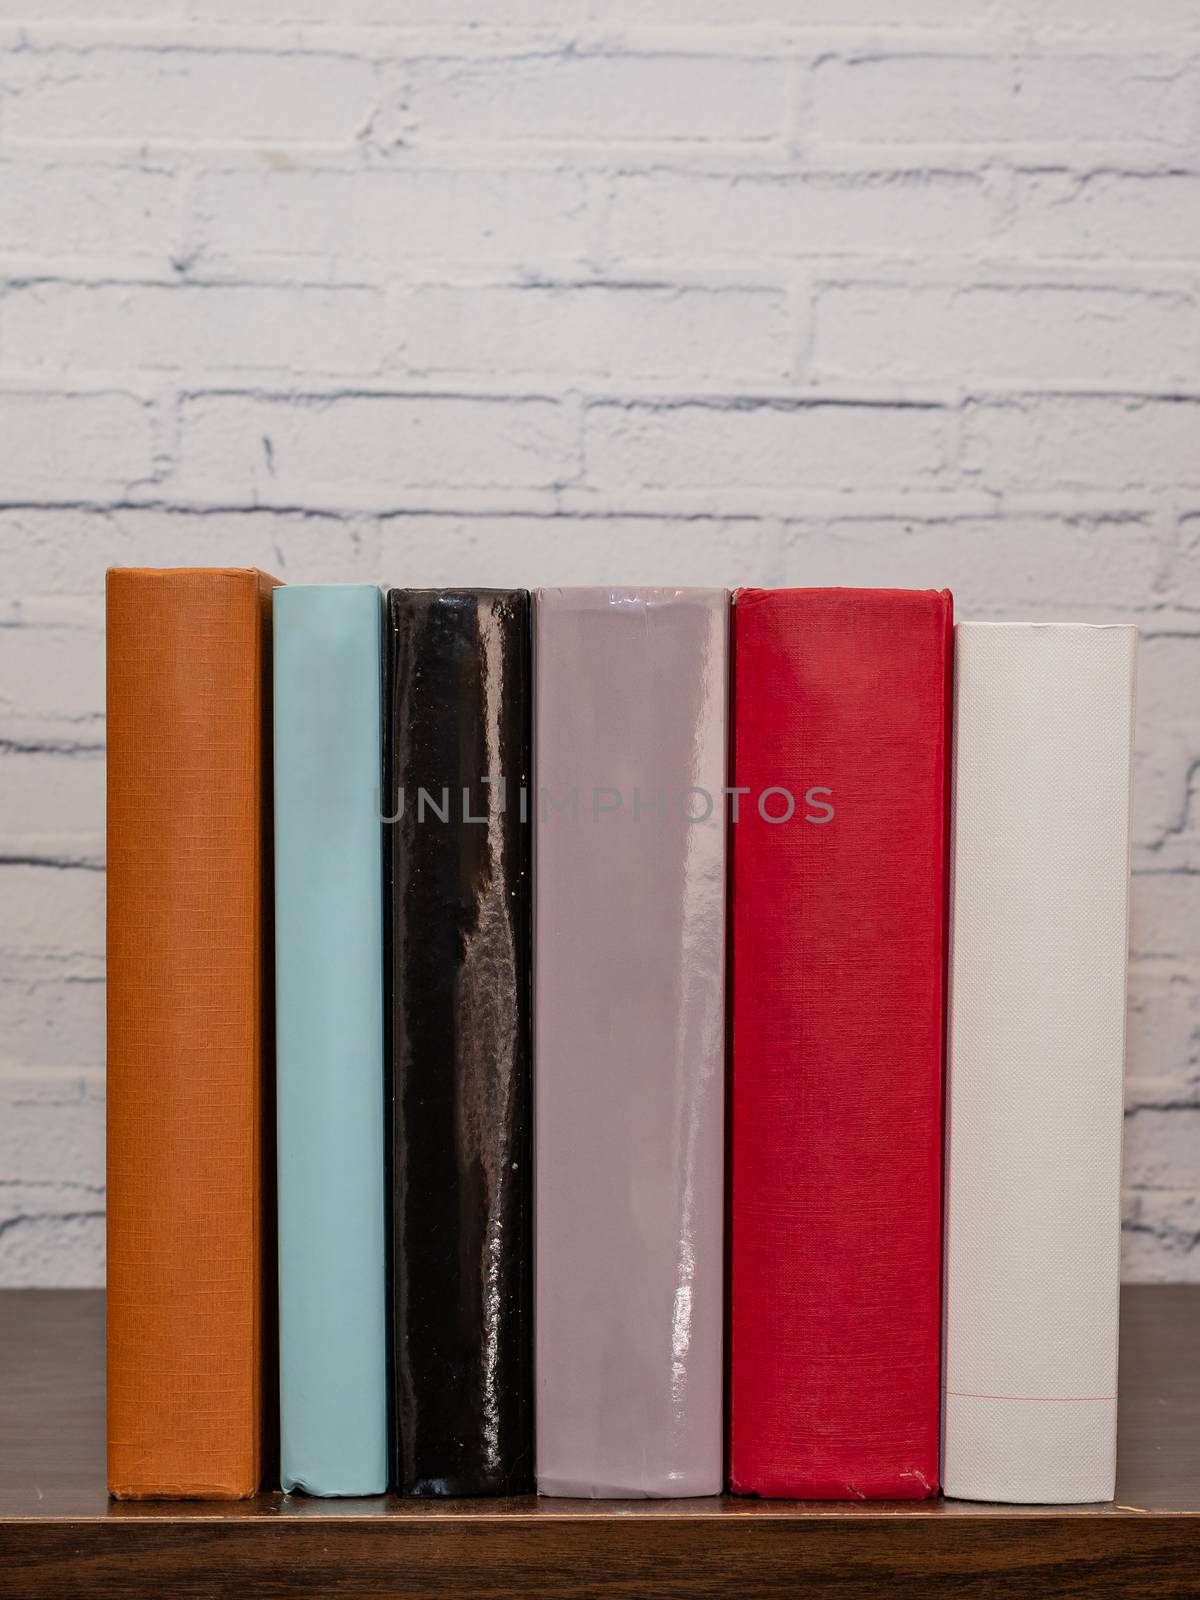 Six books of different colors resting on a dark wooden shelf by brambillasimone